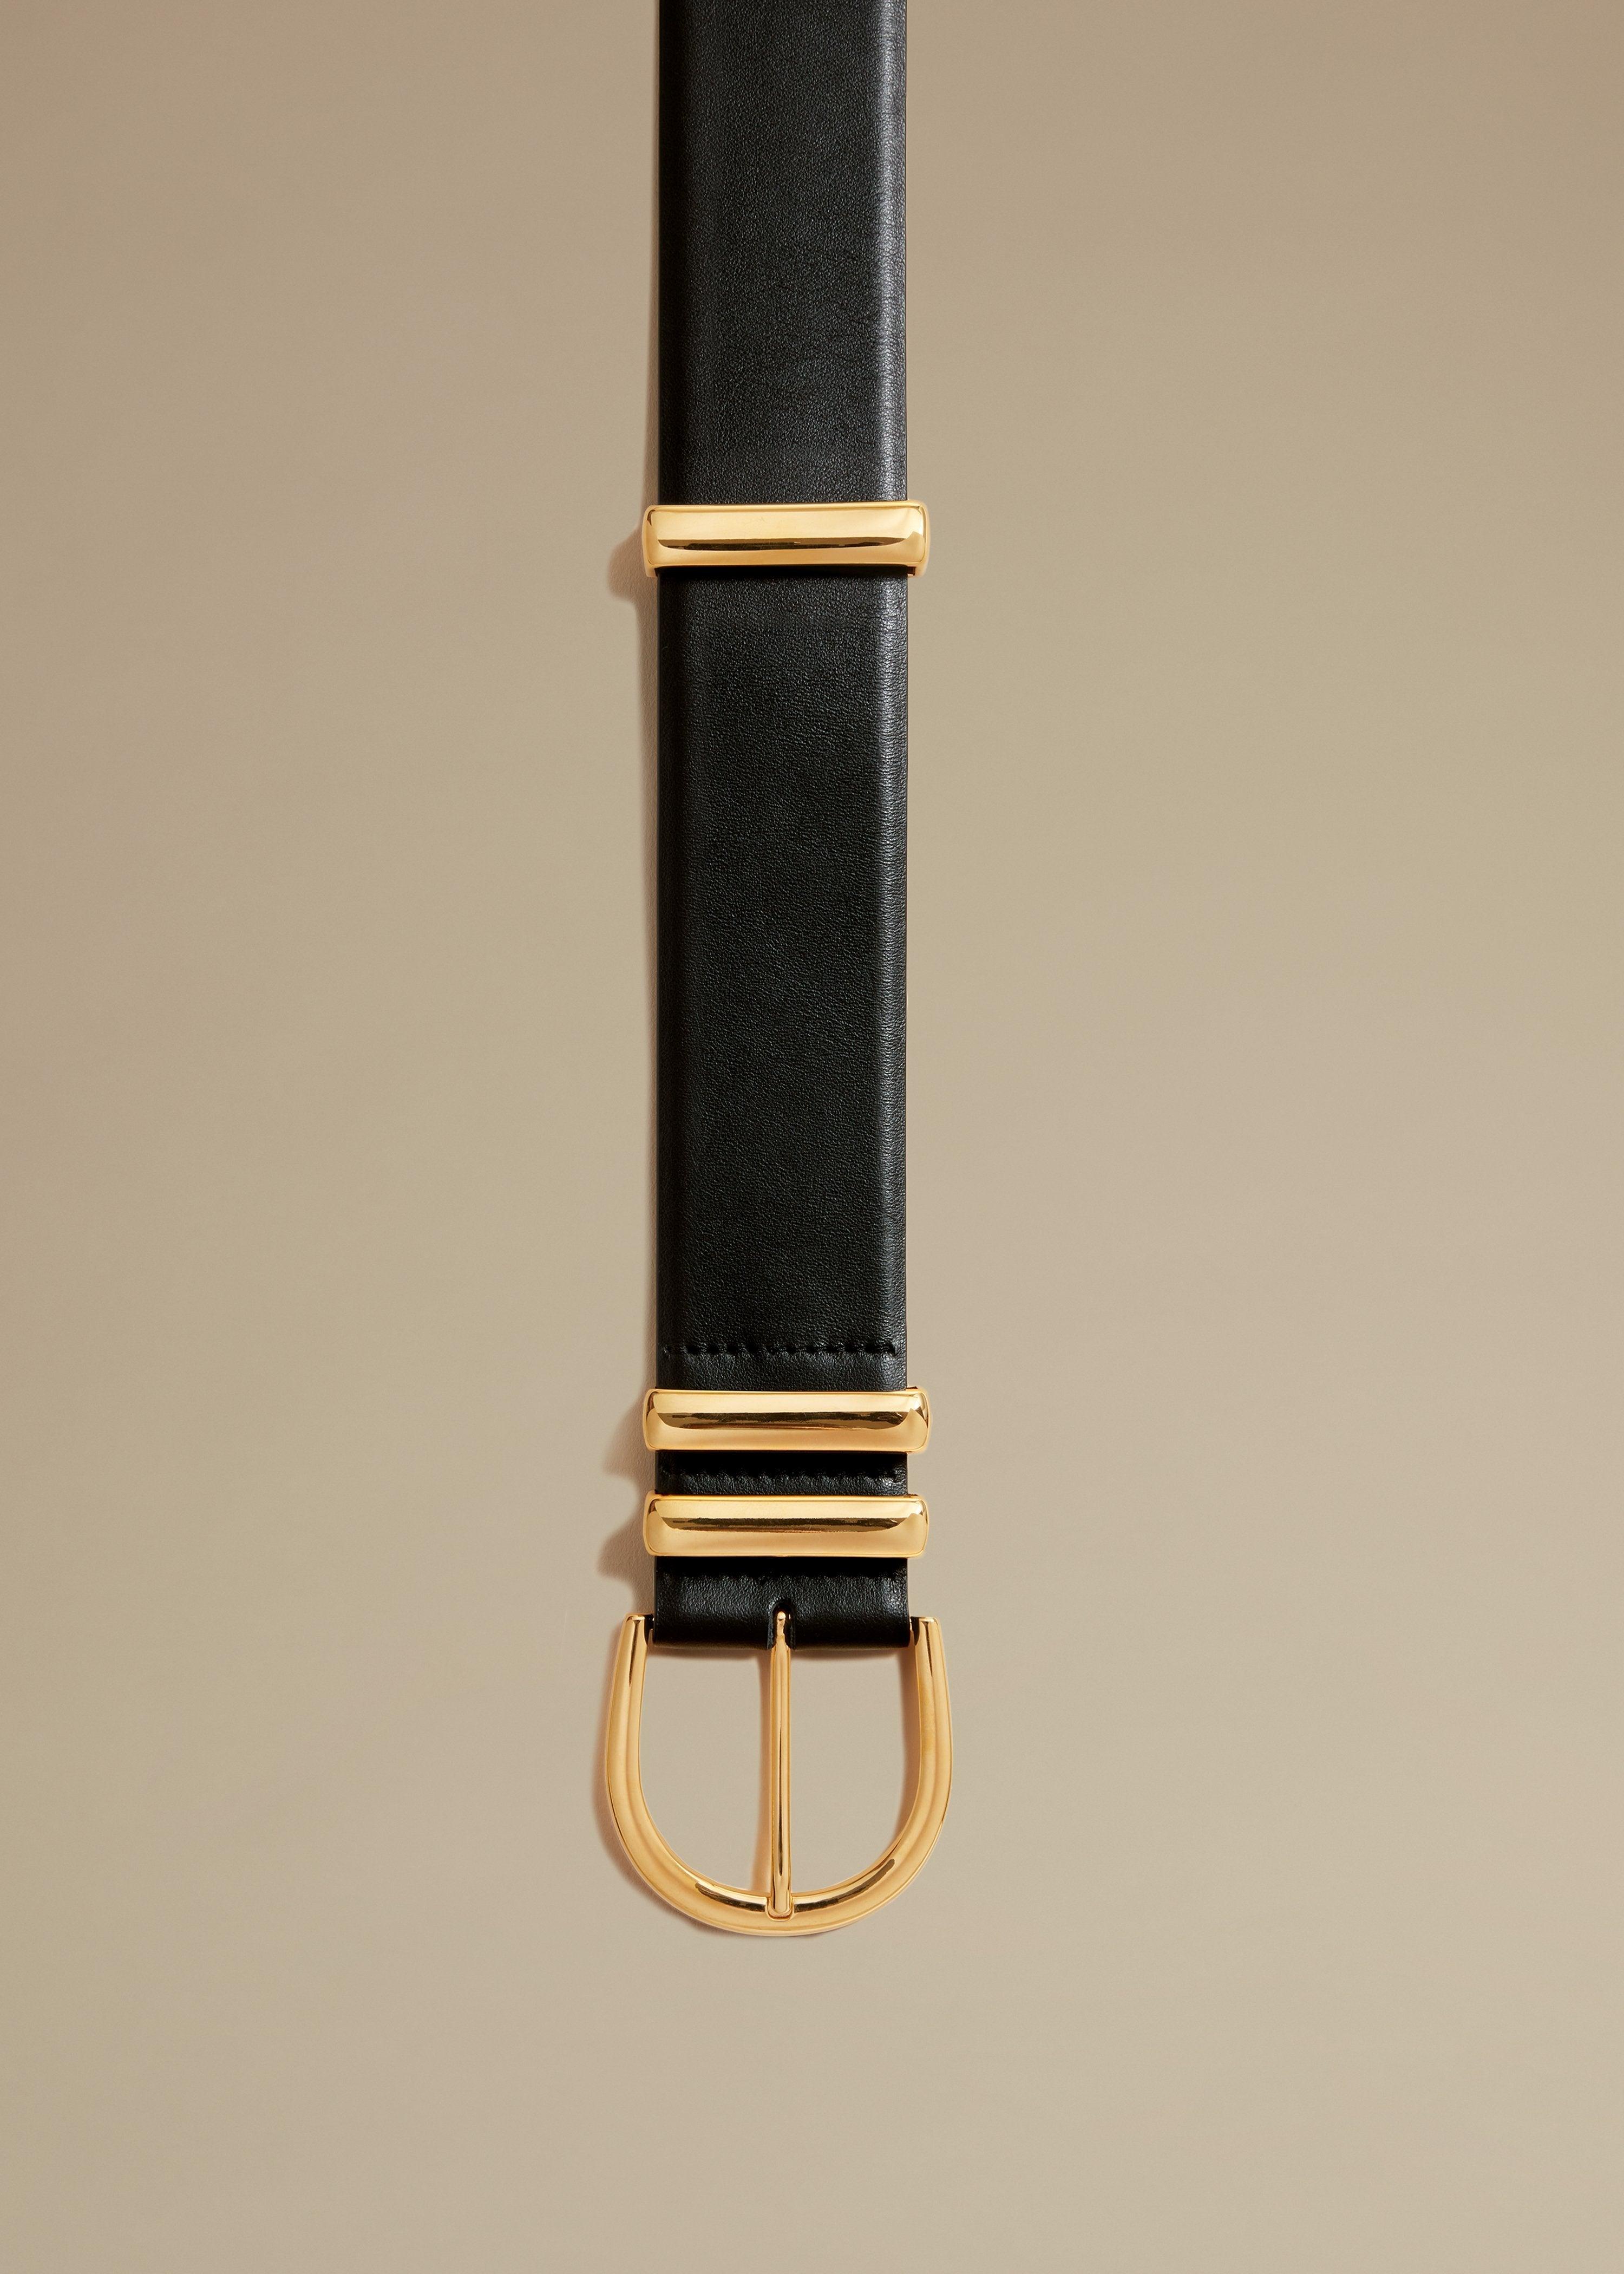 The Bella Belt in Black - The Iconic Issue